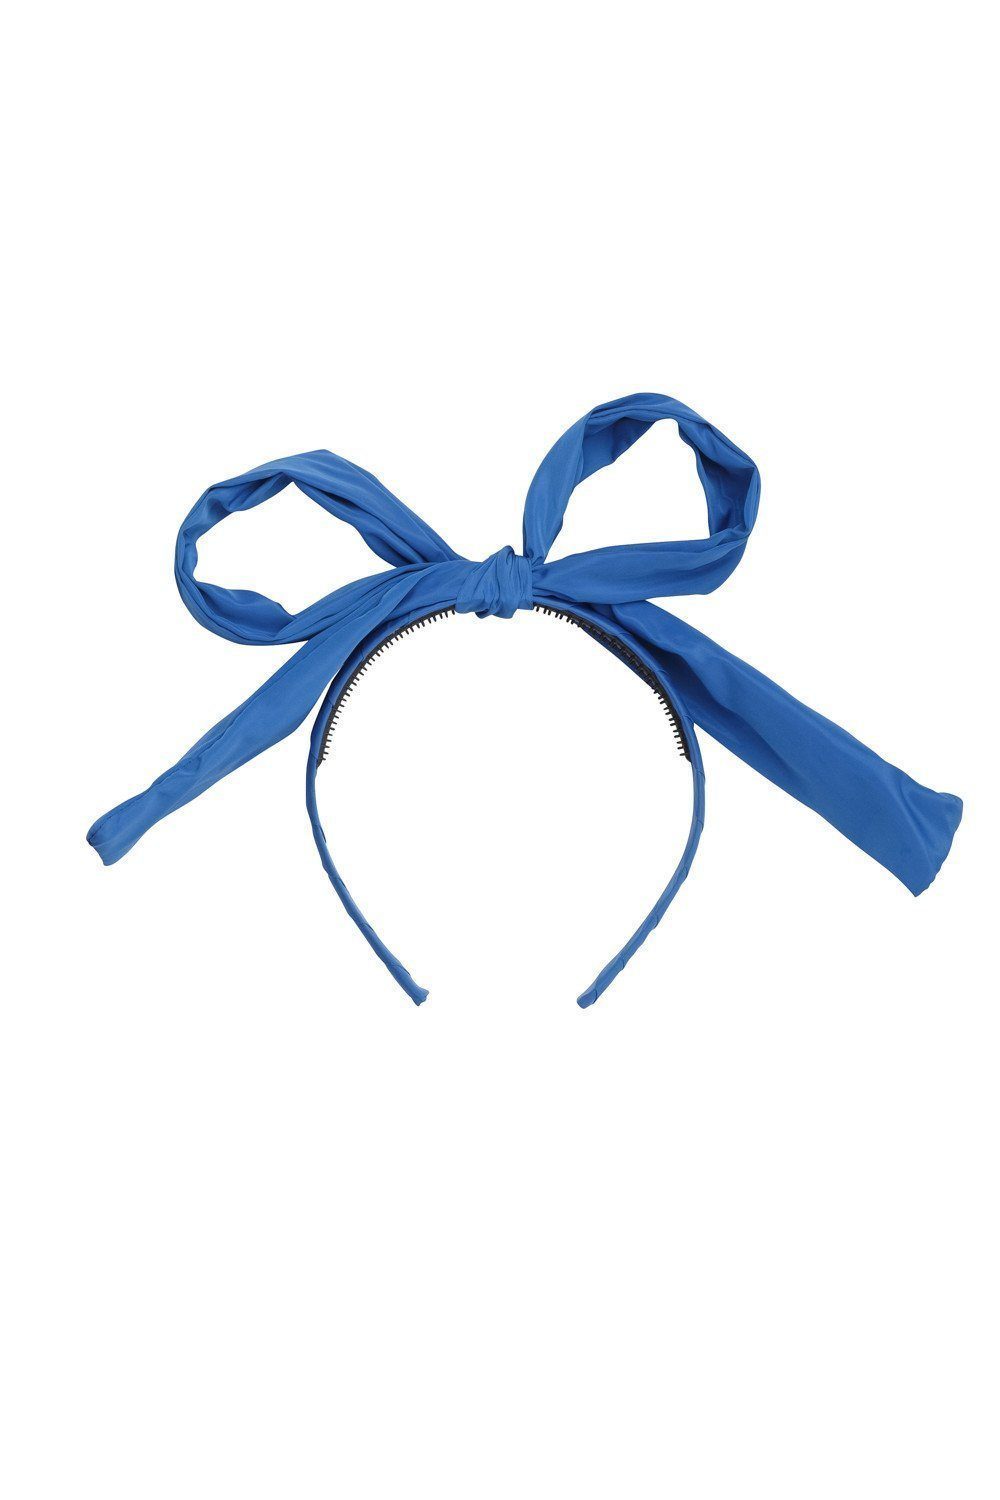 Party Bow Taffeta - Royal Blue (By Request Only, Min 10+)